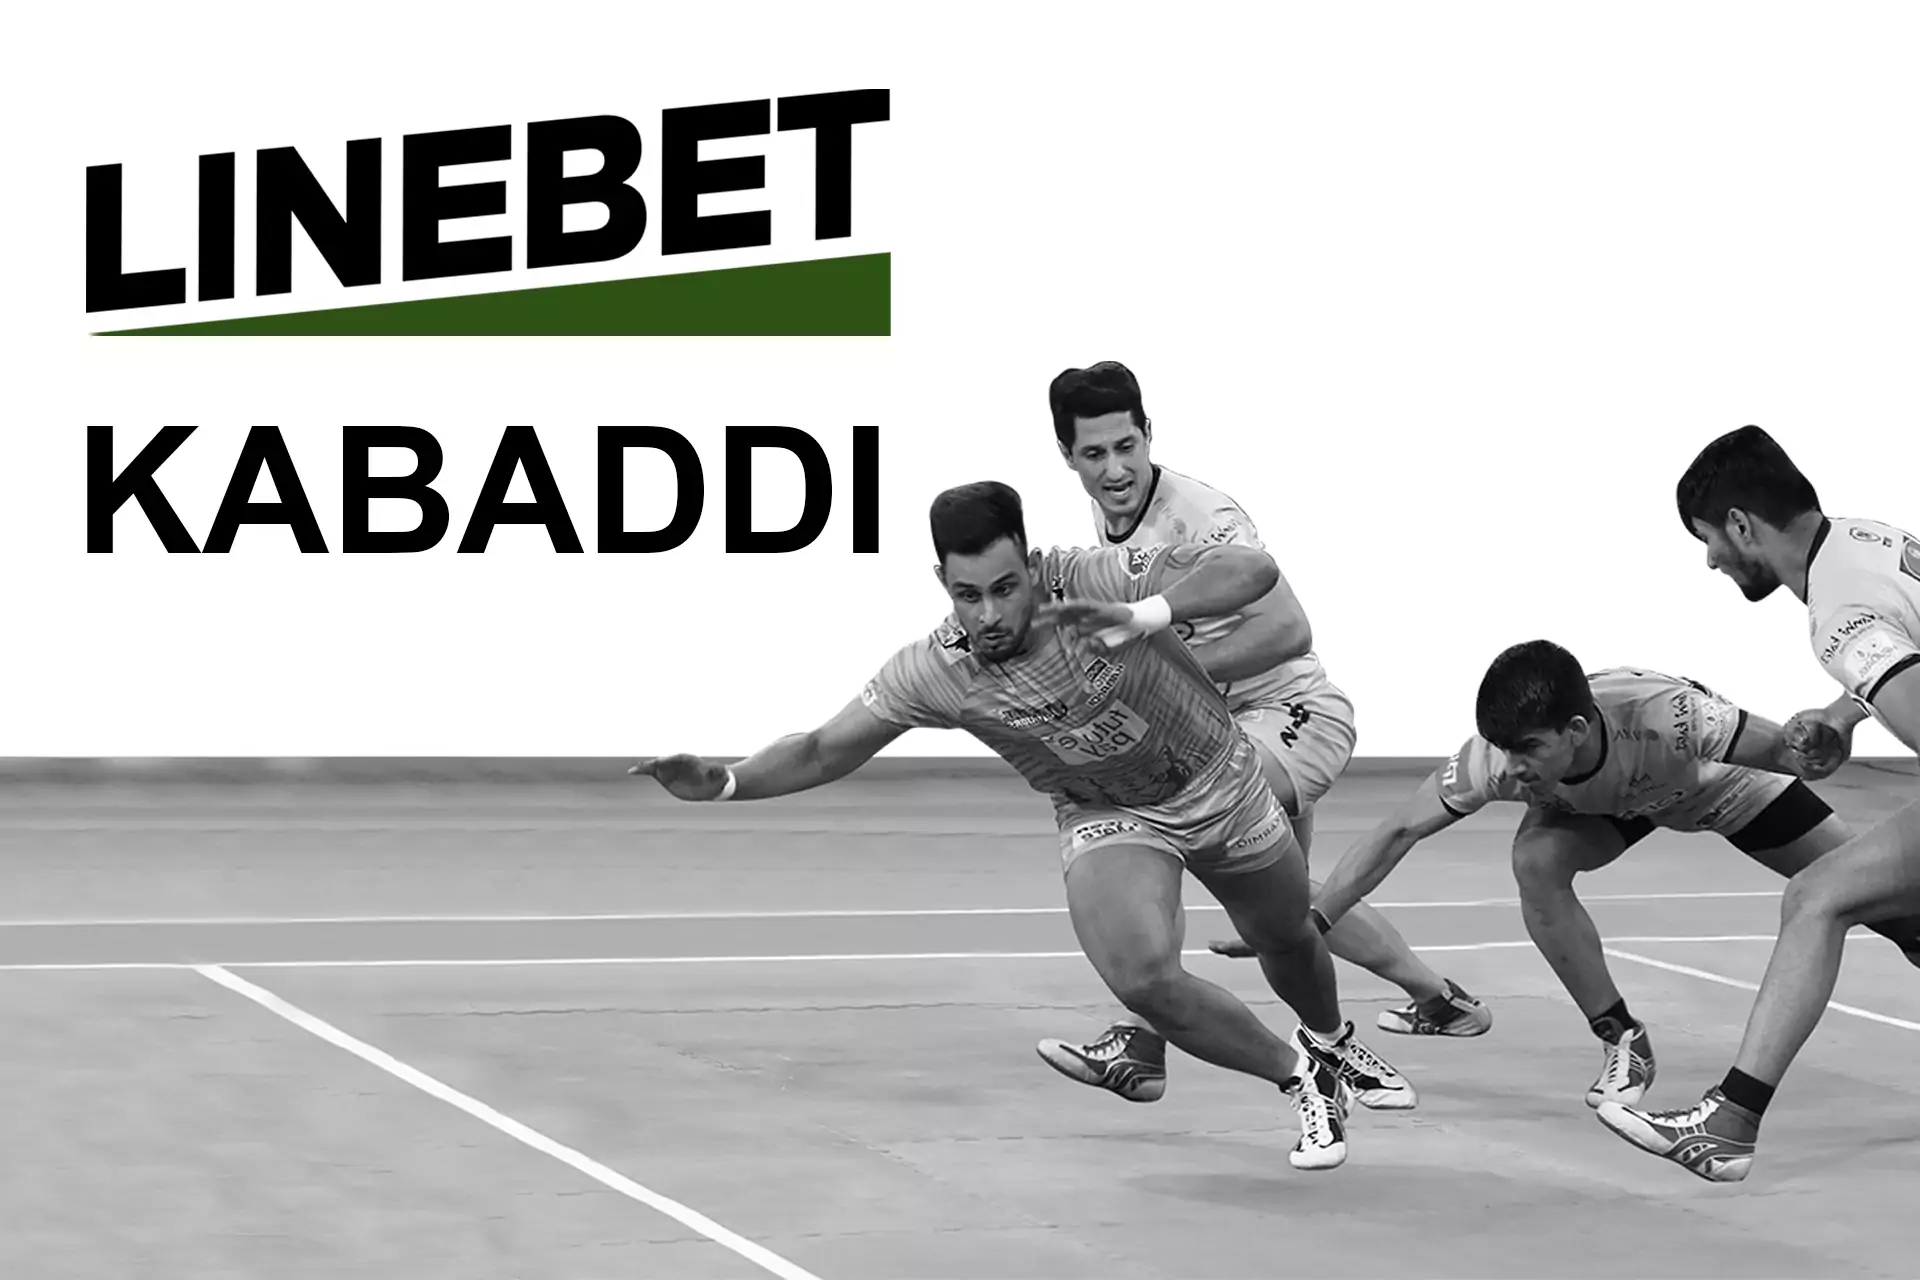 You can find events to place bets for kabaddi as well.